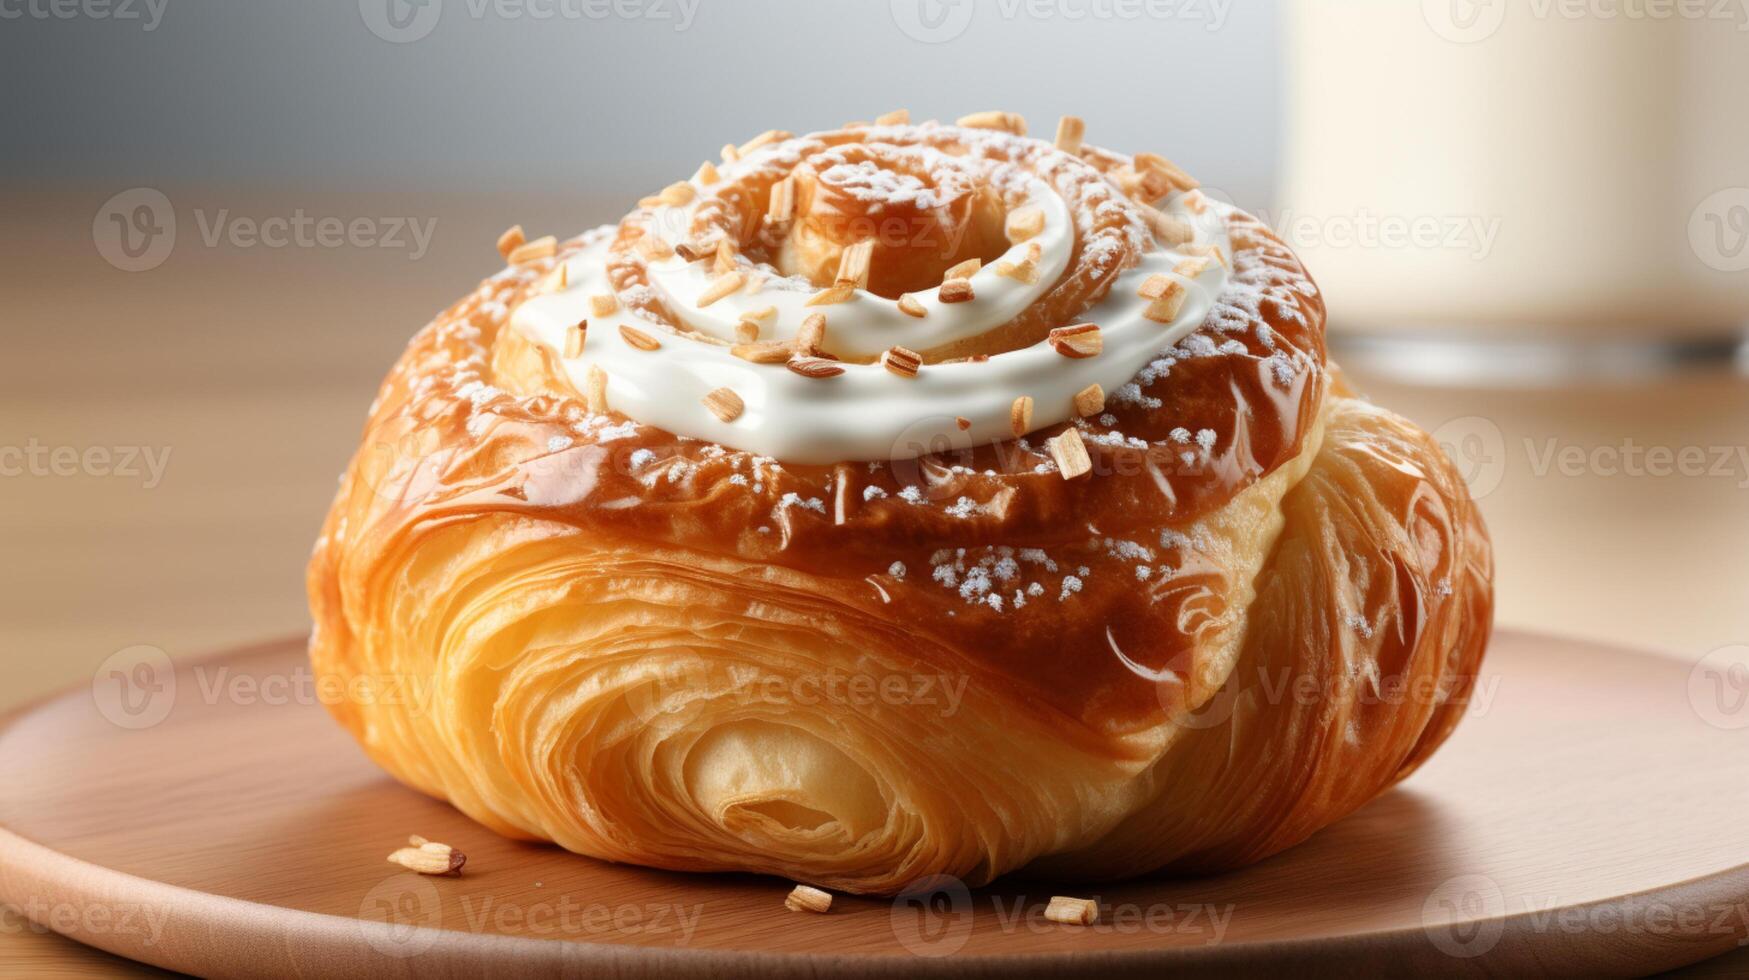 AI generated Danish pastry bread cake dessert for tea time snack photo